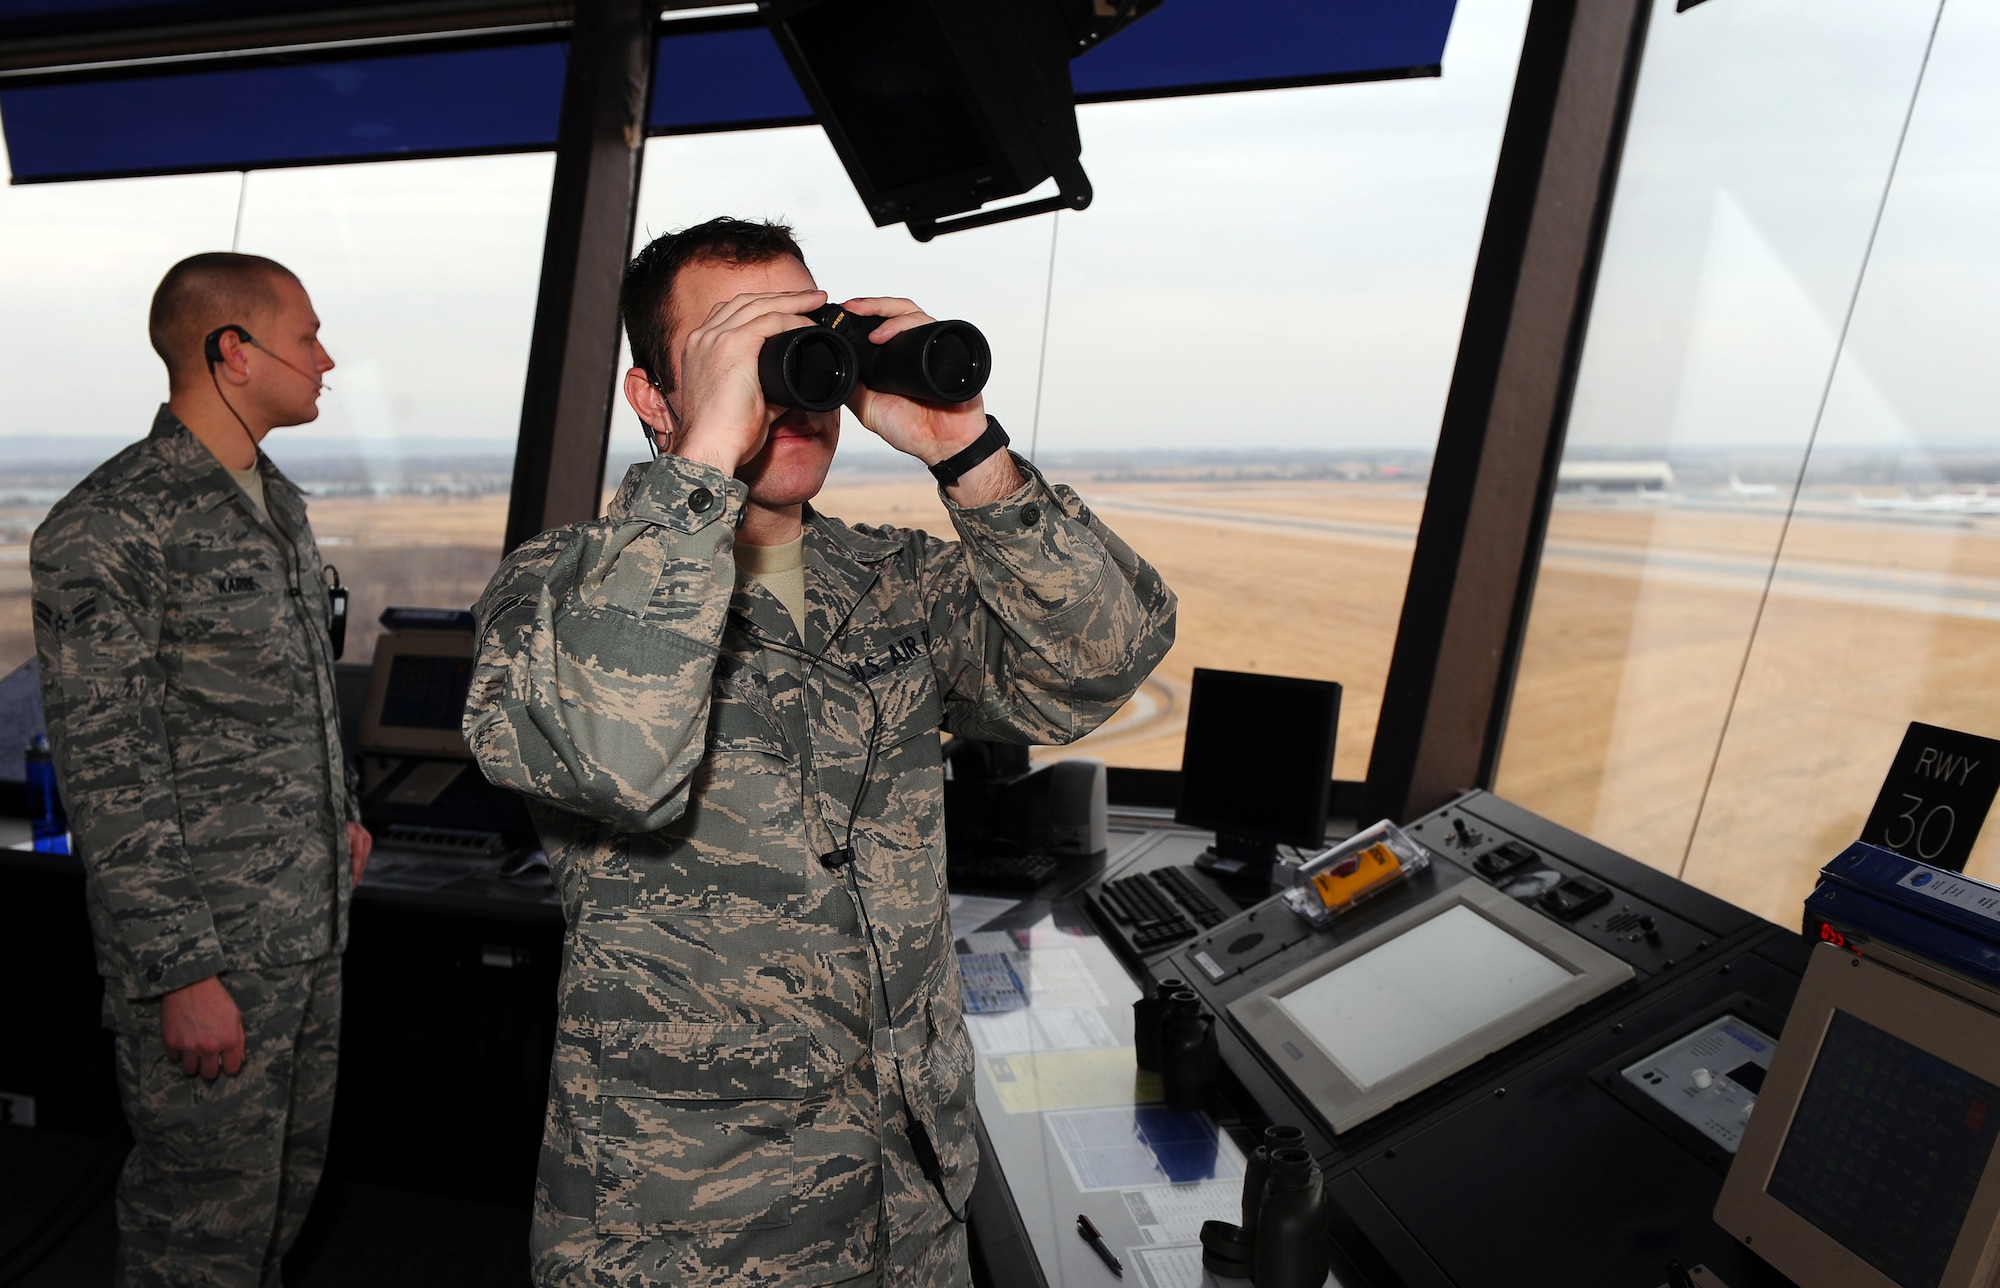 OFFUTT AIR FORCE BASE, Neb. - Airman 1st Class Mike Bier, an air traffic controller apprentice assigned to the 55th Operations Support Squadron, monitors east bound aircraft descending here, Feb. 24. U.S. Air Force Photo by Josh Plueger (Released)
